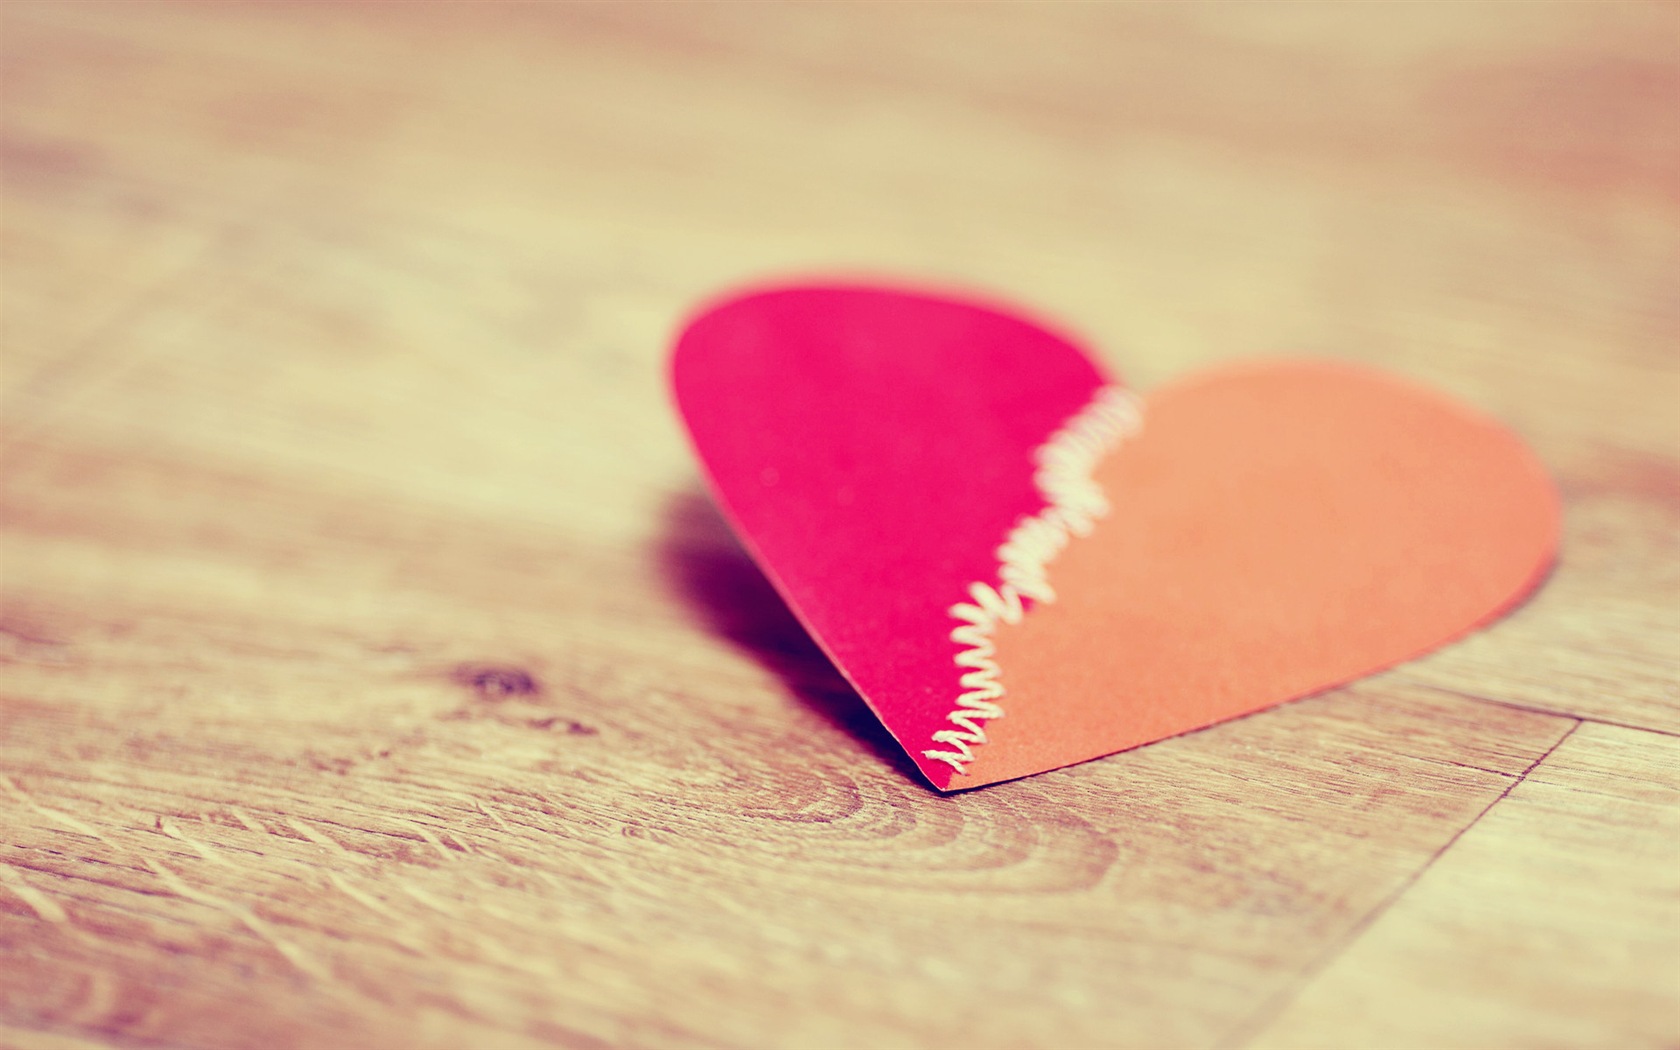 The theme of love, creative heart-shaped HD wallpapers #5 - 1680x1050